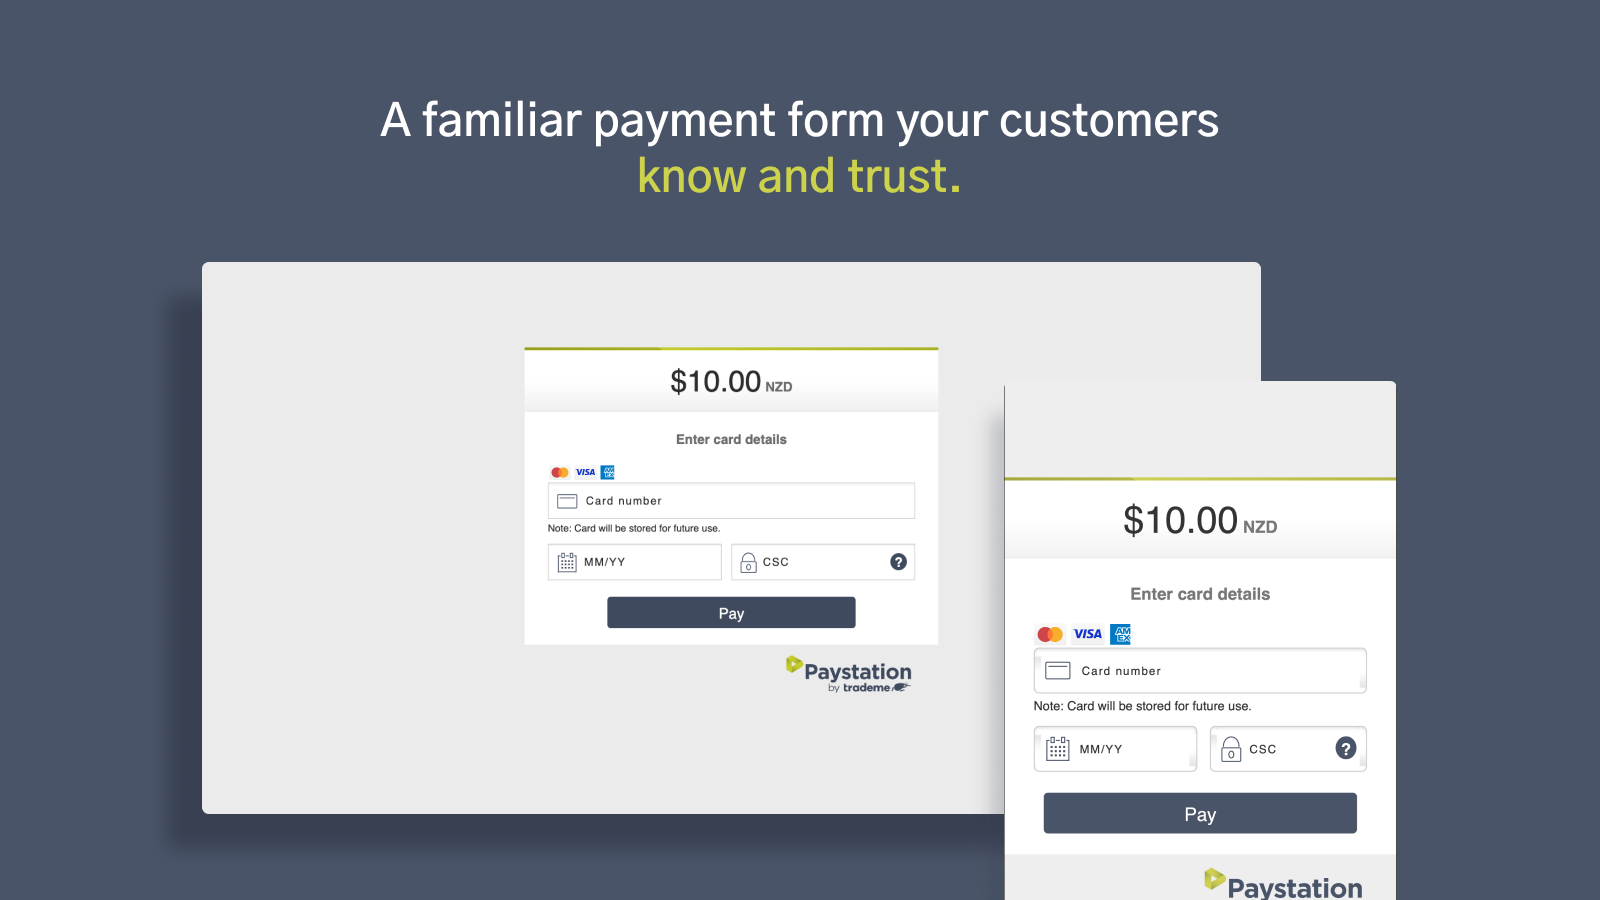 Paystation’s payment form works on mobile and desktop devices.